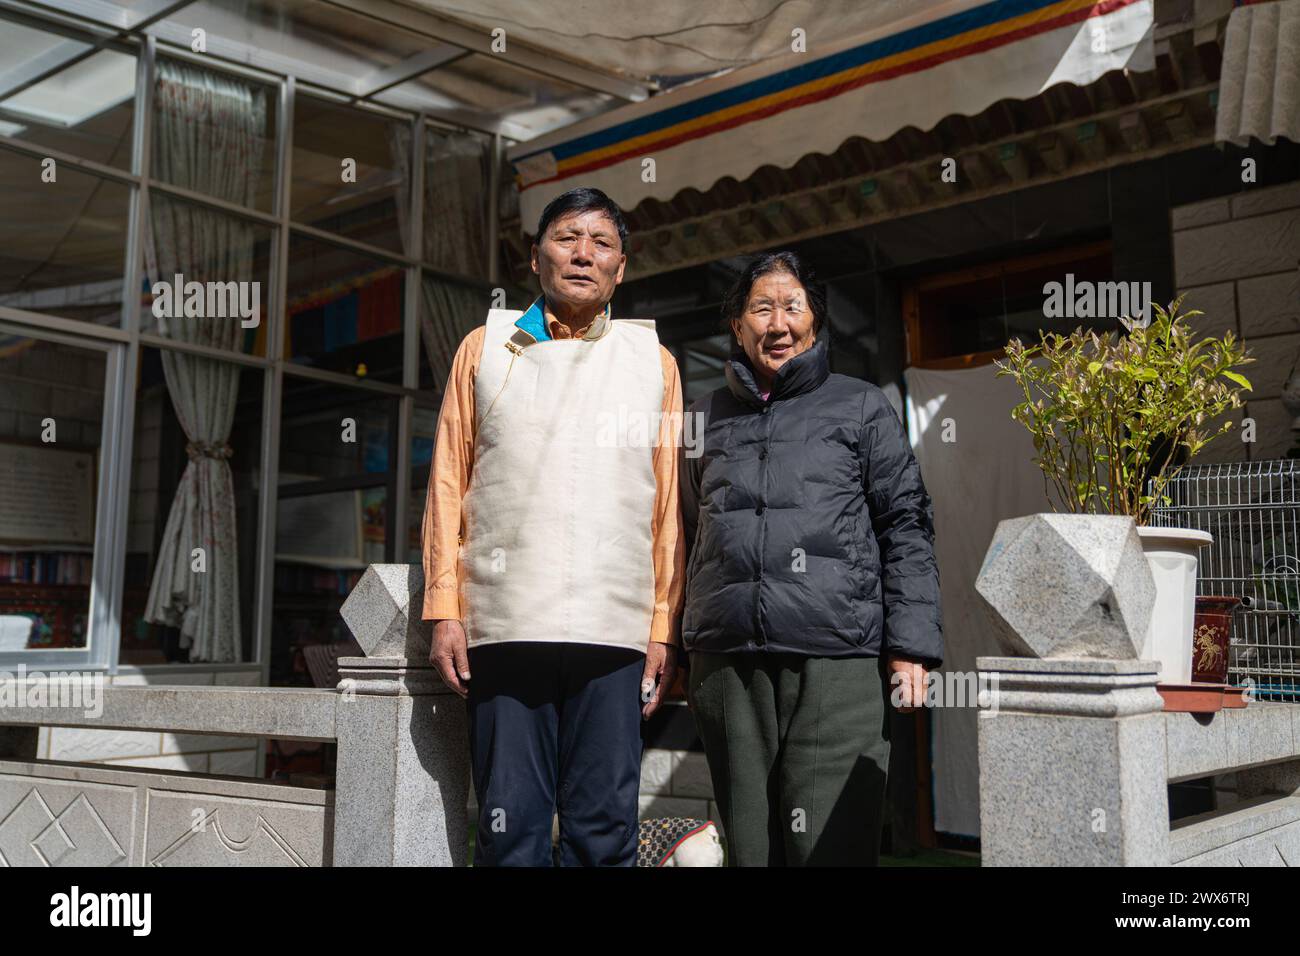 (240328) -- LHASA, March 28, 2024 (Xinhua) -- Phutsering poses for a photo with his wife Nyima Tsangmo at home in Lhasa, southwest China's Xizang Autonomous Region, March 23, 2024. Born in 1944 in Bainang County of Xigaze City, Phutsering was raised in a former serf family. A humble shack, situated near the manor where his mother toiled as a serf, served as his childhood home. Meanwhile, his father, employed at a separate manor, struggled to make ends meet by farming and crafting during lean months, barely generating sufficient income to cover the rent and taxes for their dwelling and fields. Stock Photo